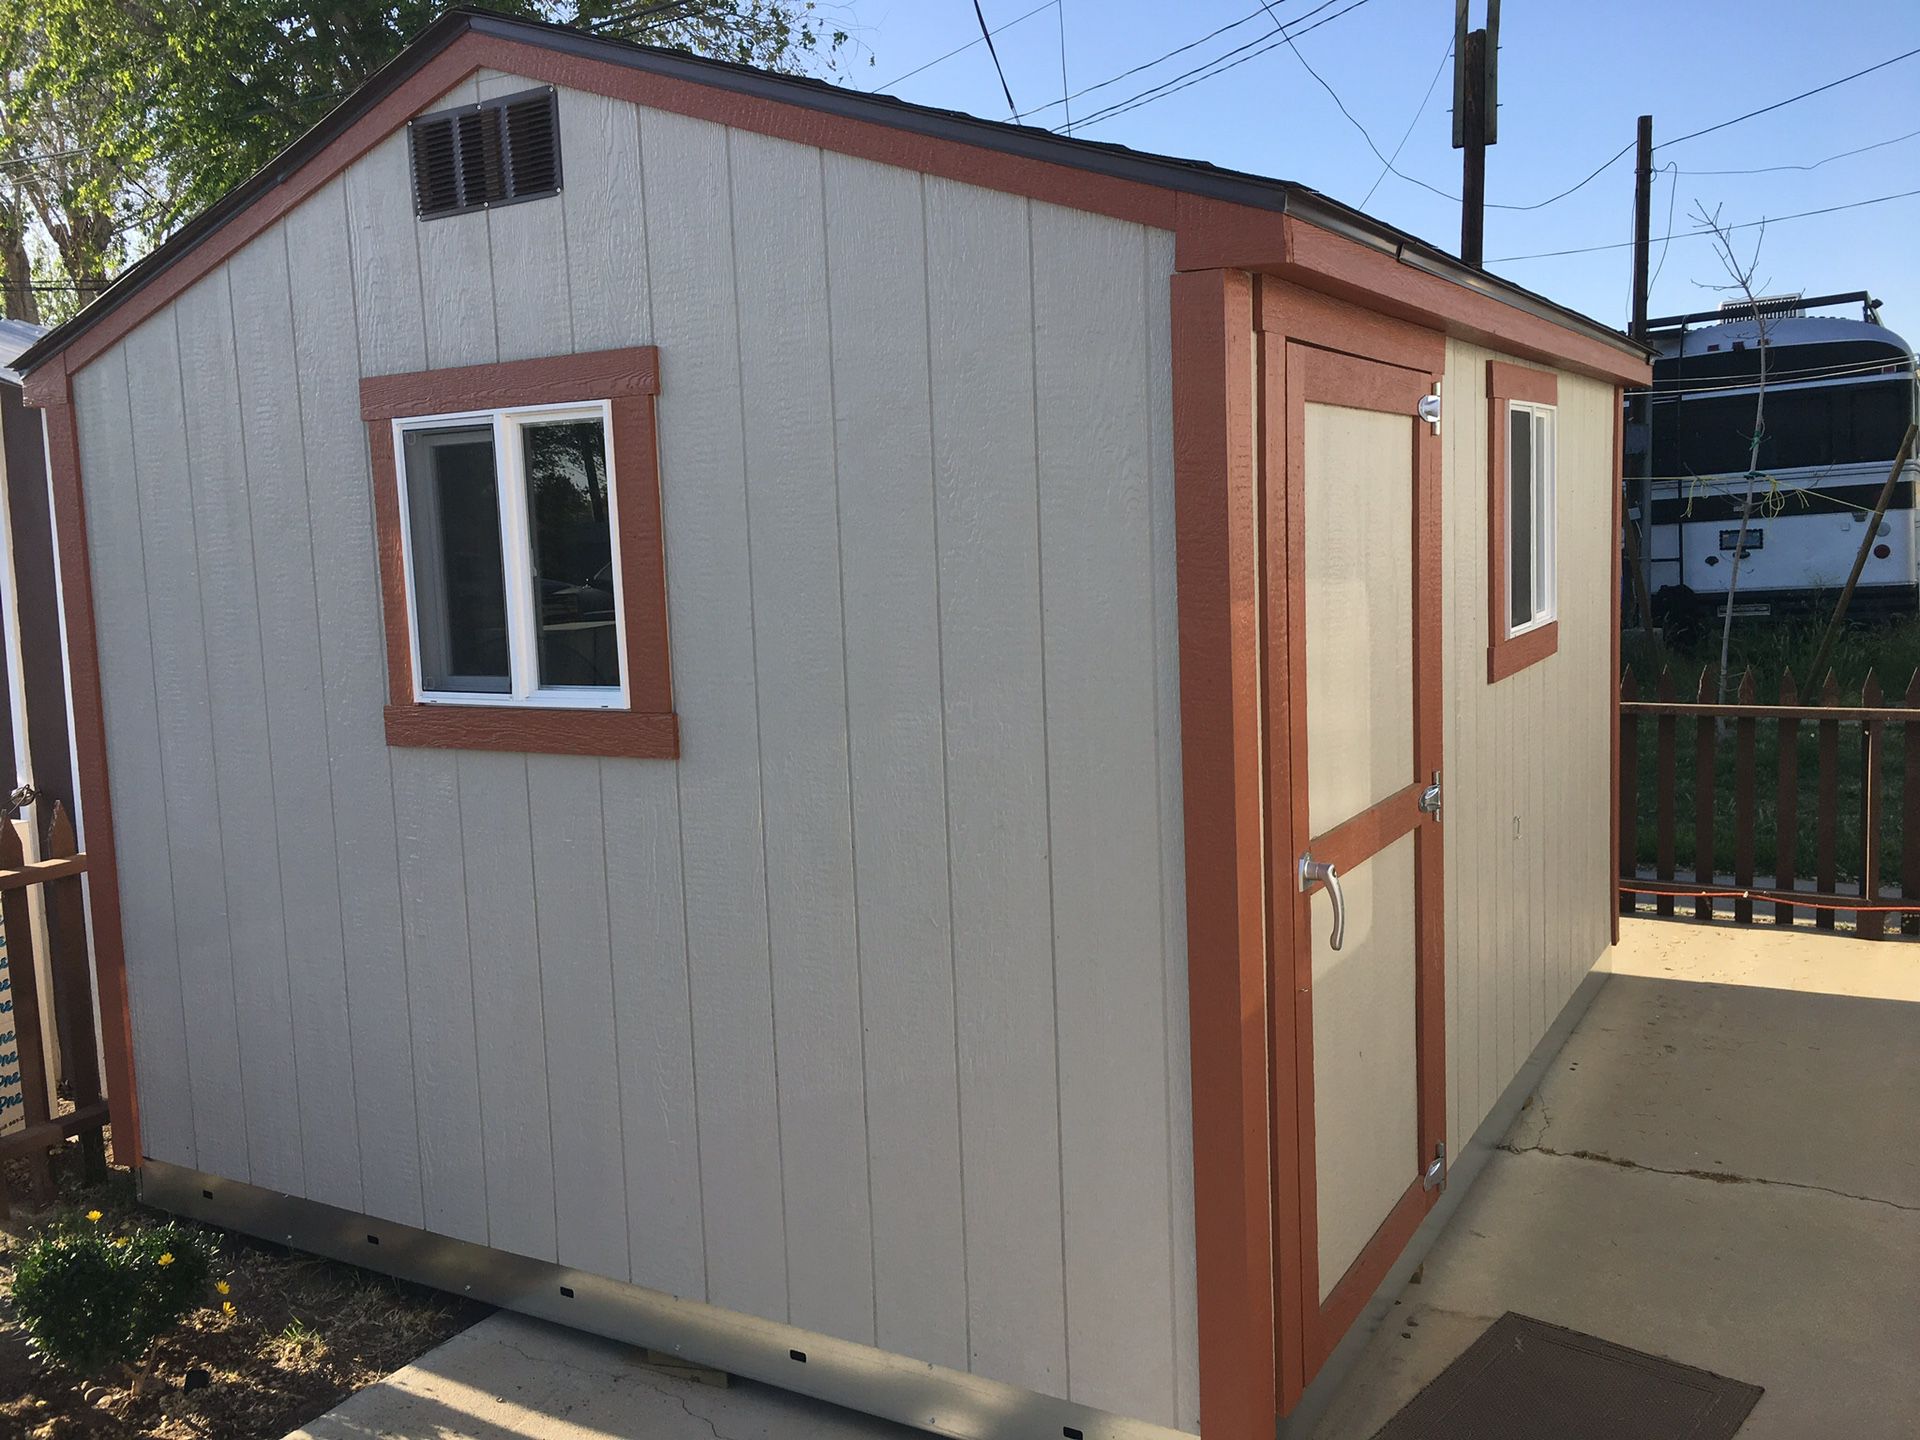 10 x 12 Tuff Shed - Located in Lancaster CA, free delivery to The OC